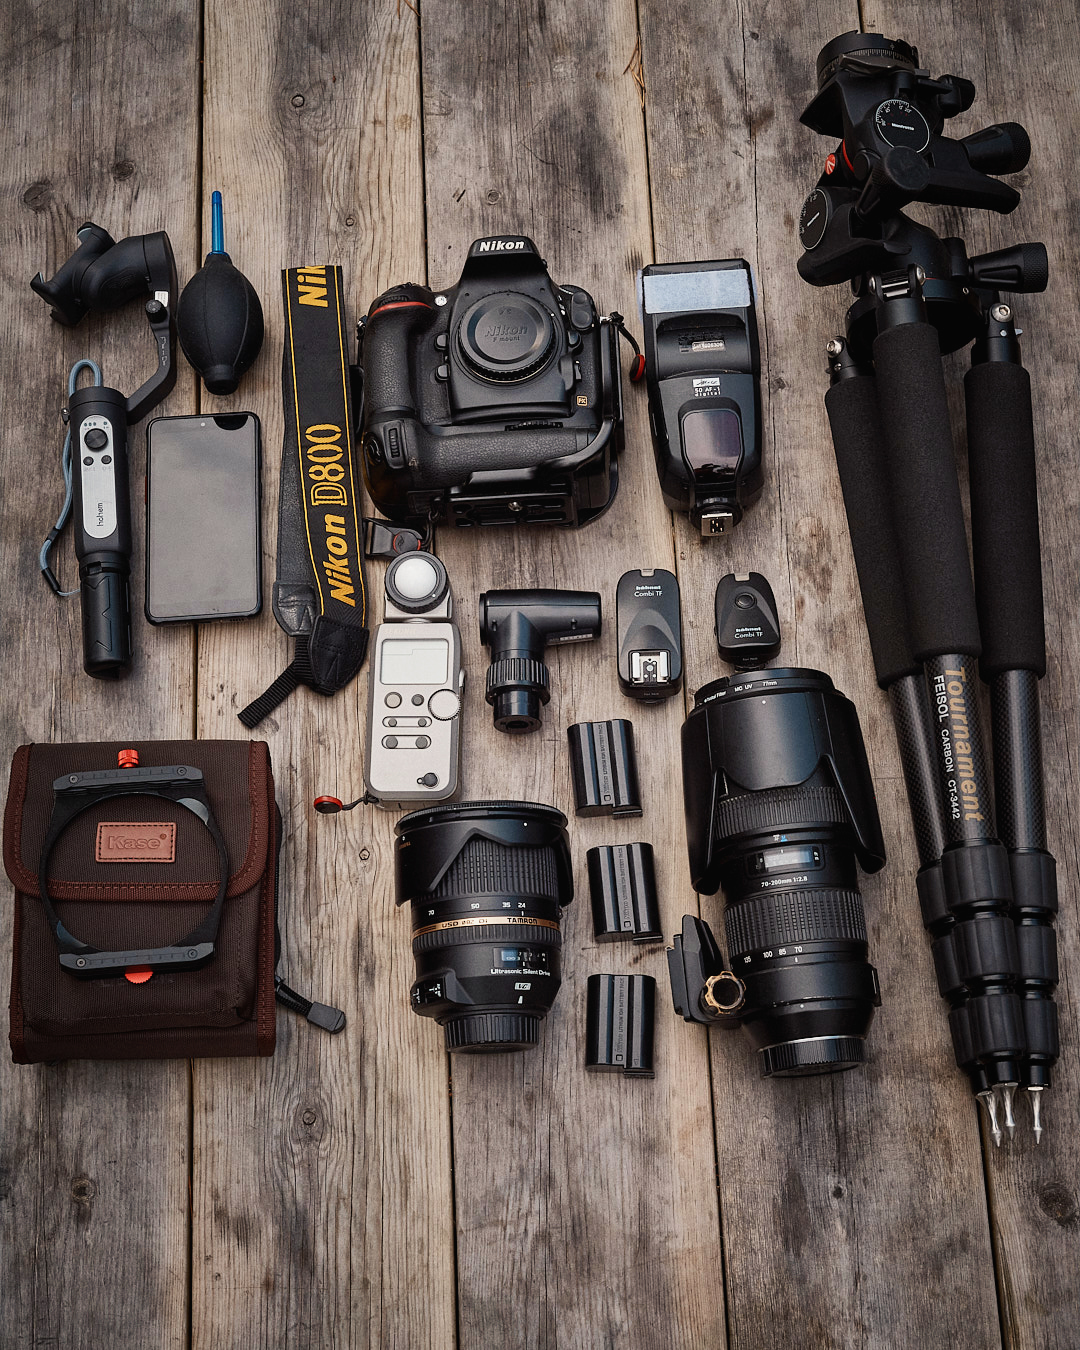 A display of the landscape gear I normally use